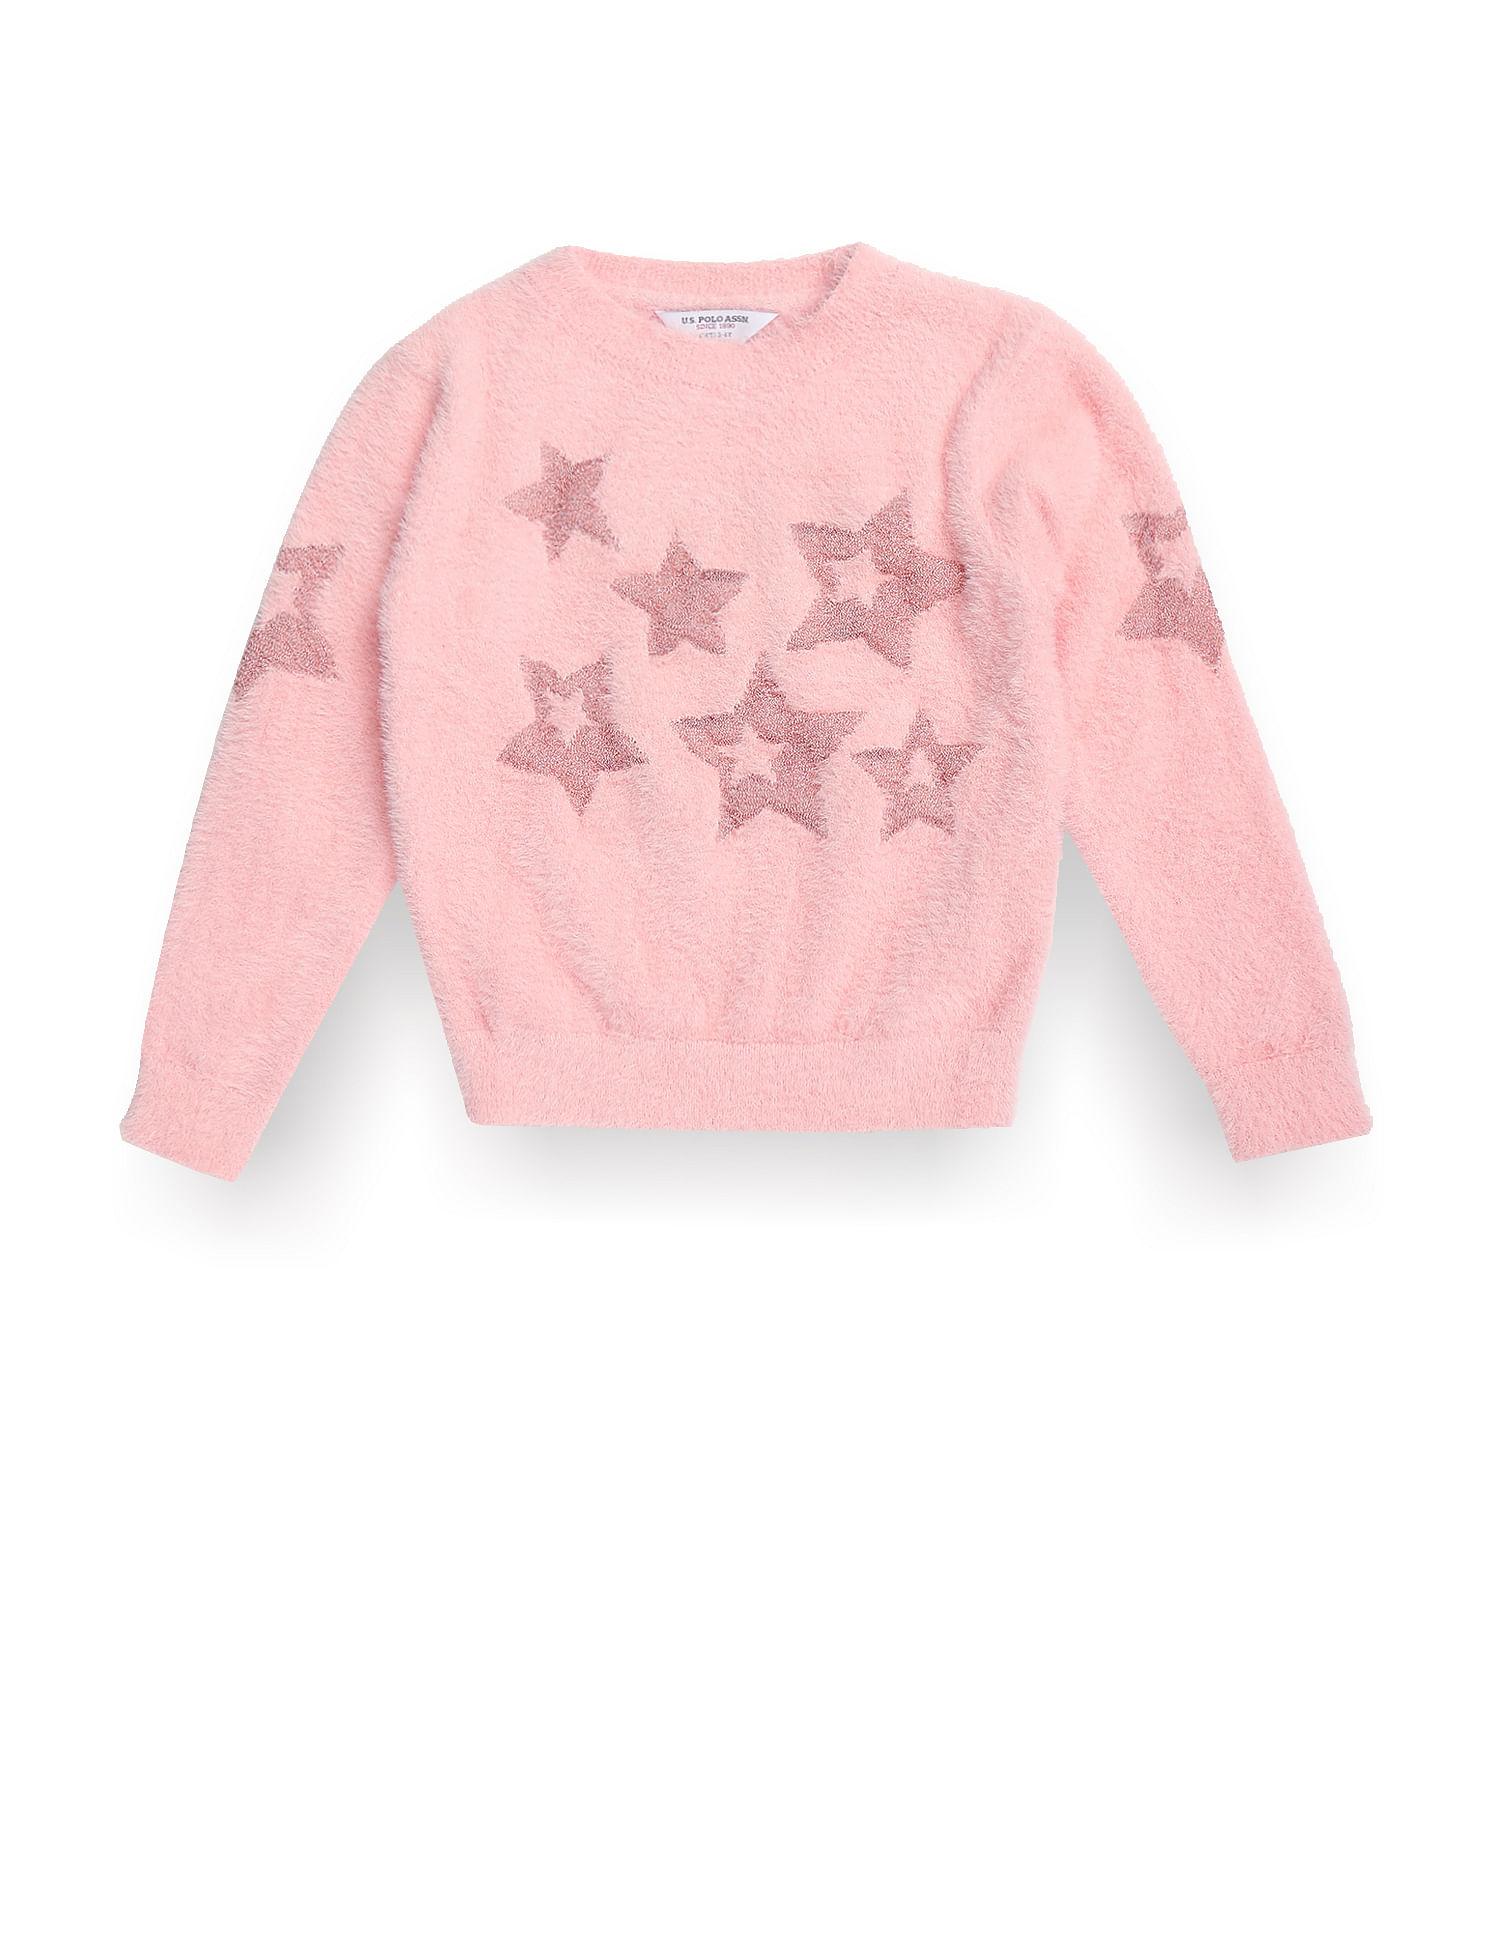 Girls Patterned Knit Pullover Sweater